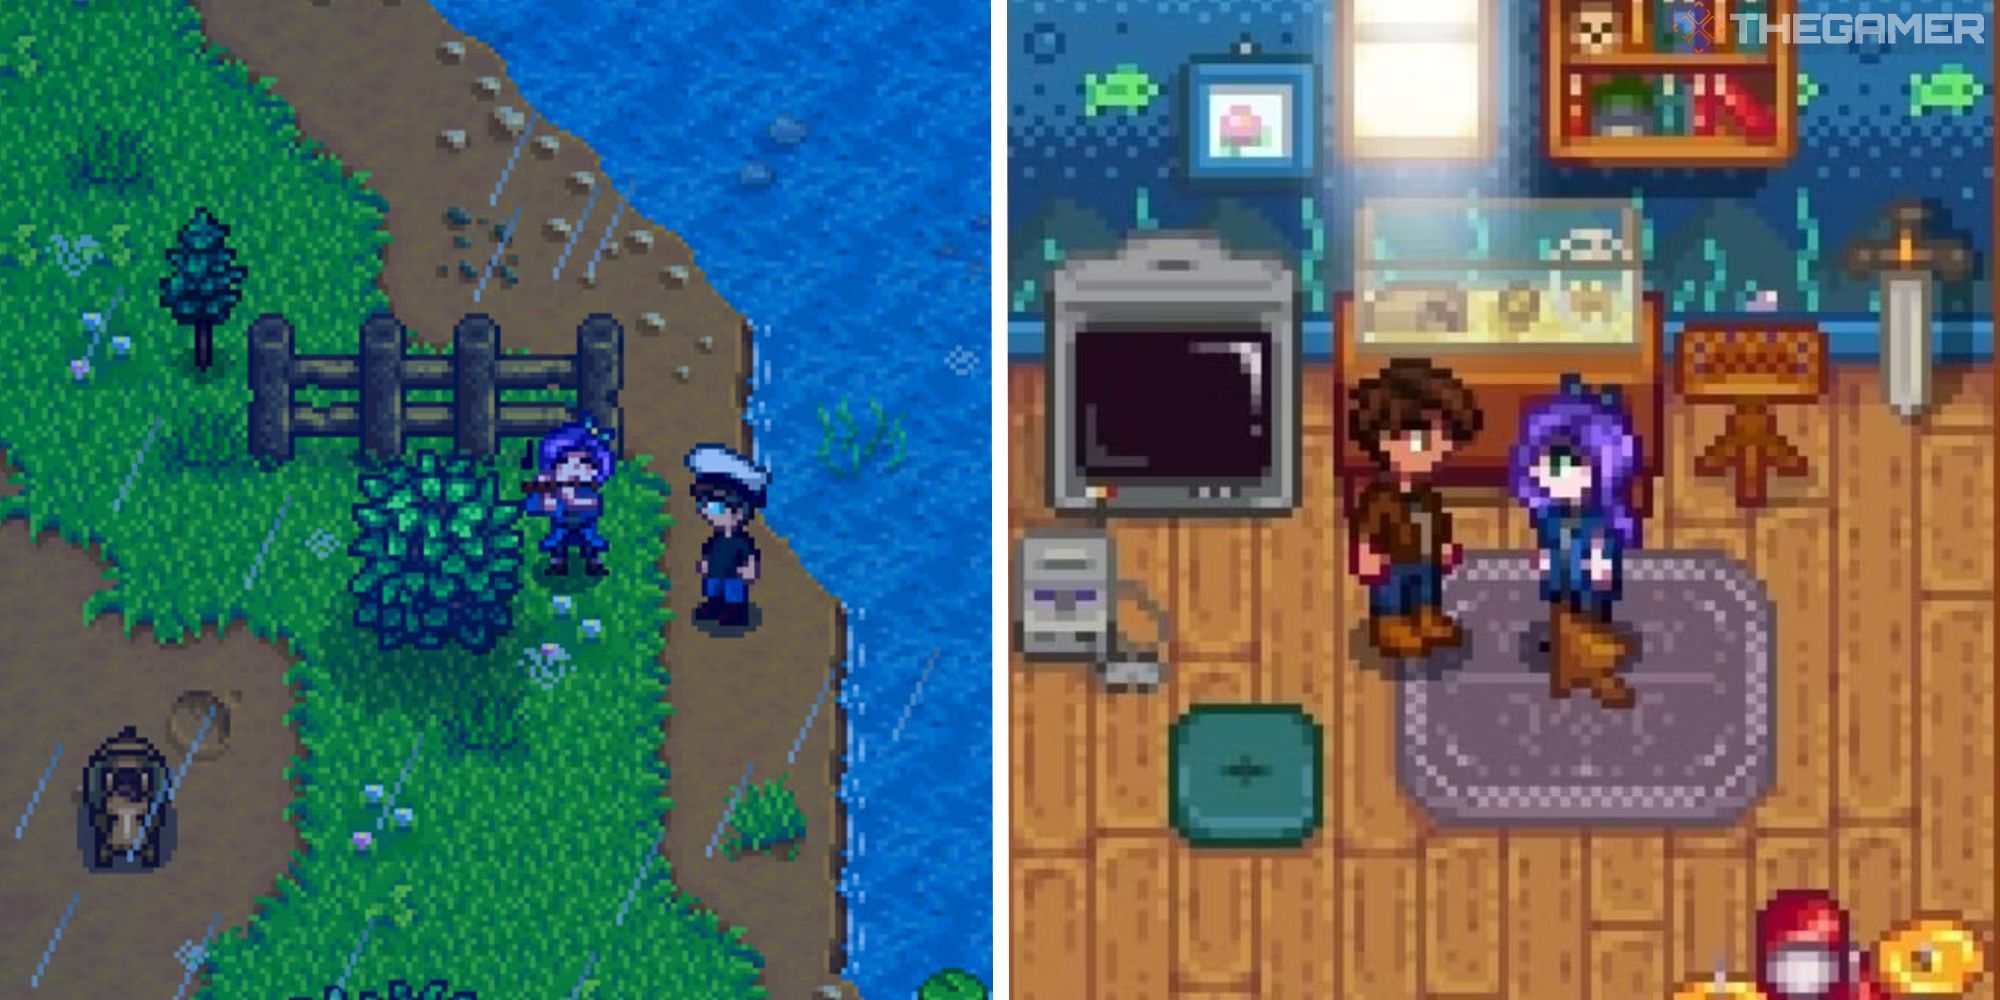 split image showing abigail playing the flute next to image of abigail and player in her spouse room